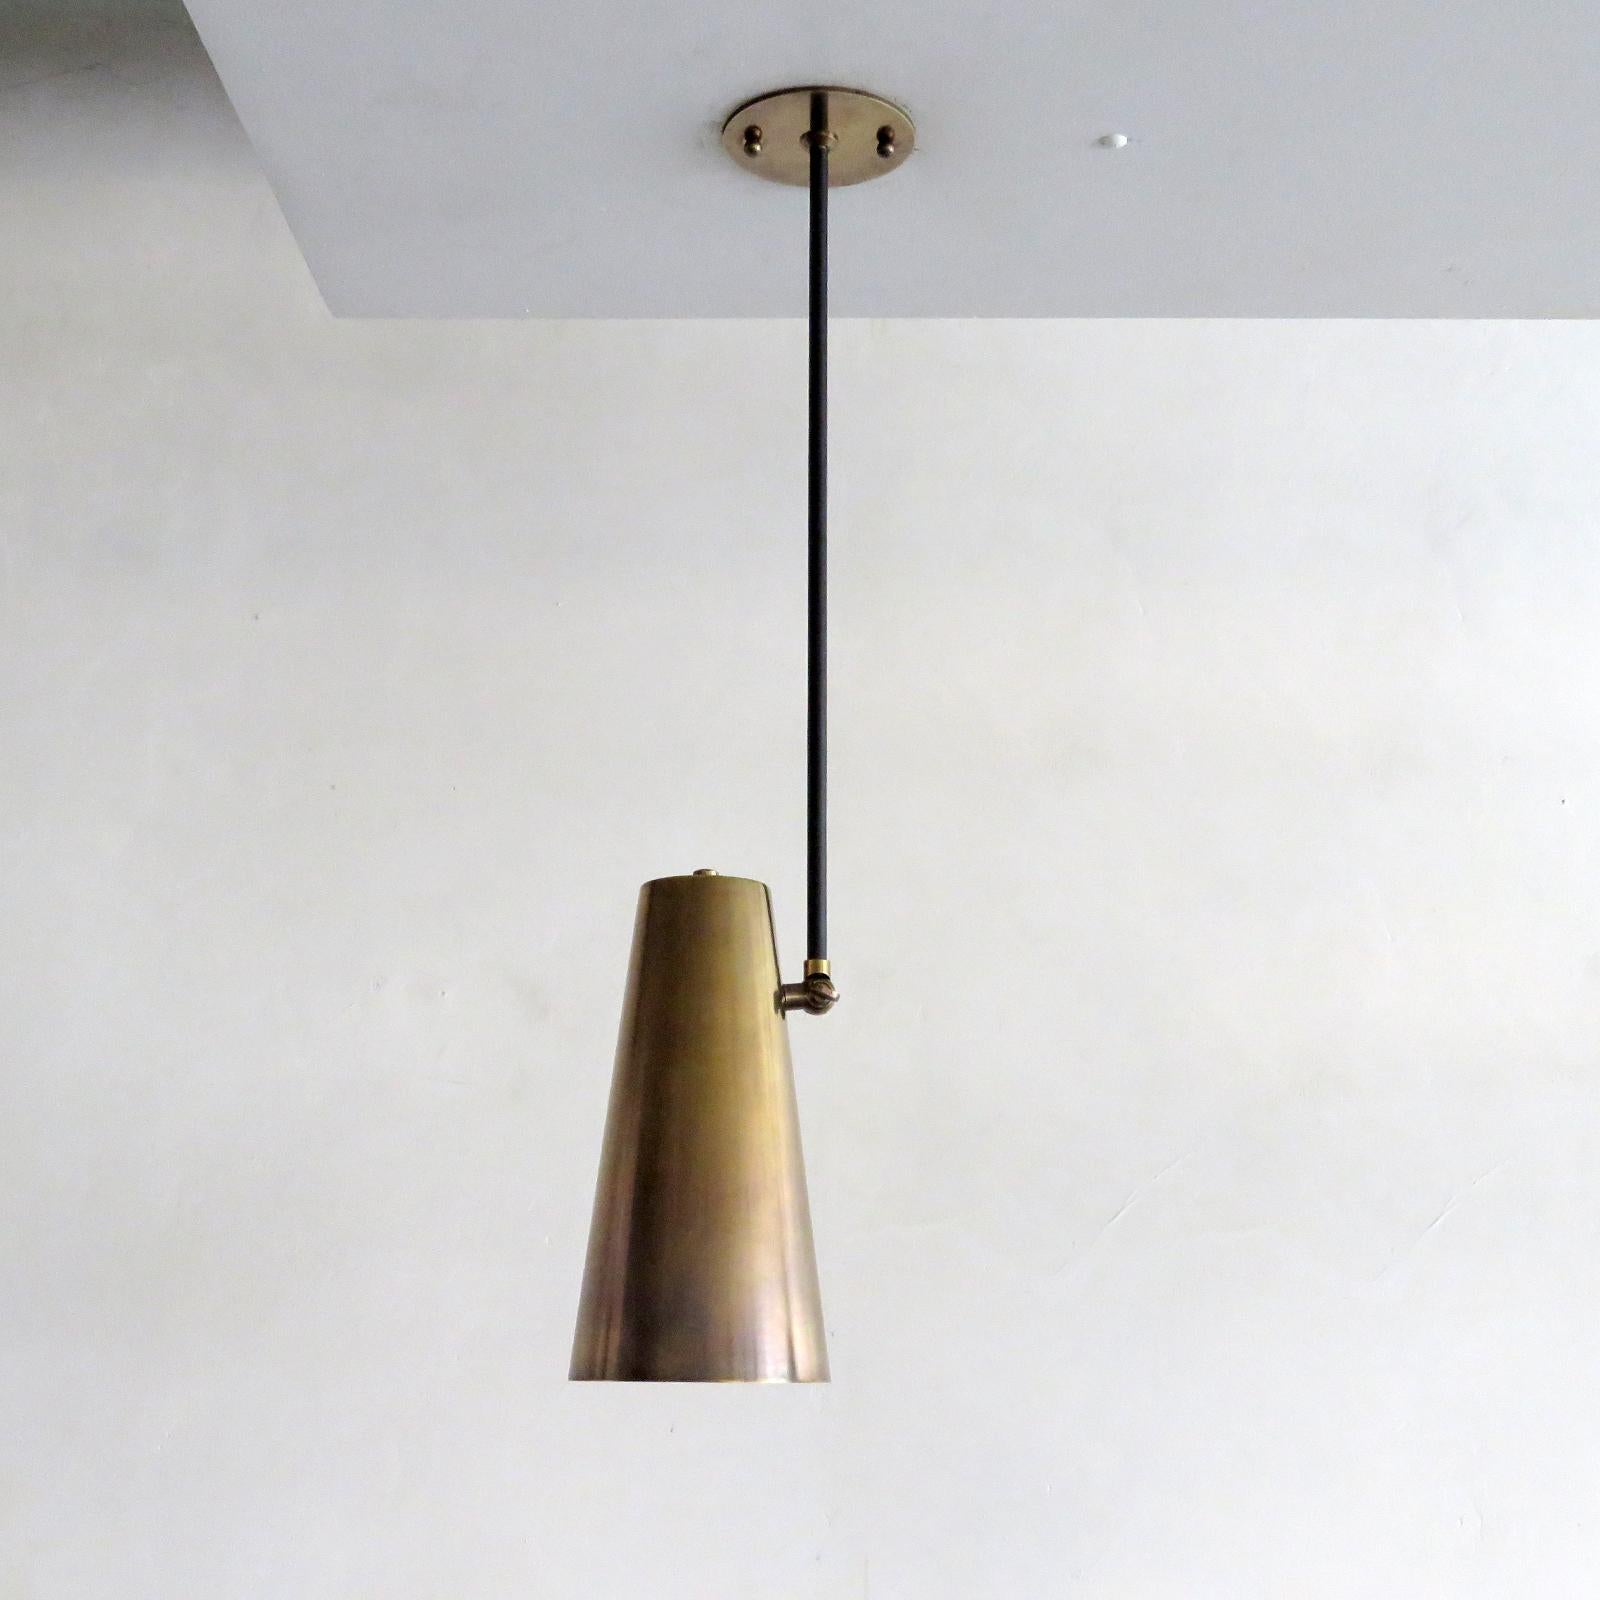 Elegant articulate 'Copa' ceiling lights designed by Gallery L7, handcrafted and finished in Los Angeles from American brass with an aged brass cone on black enameled rod. The cone angle can be adjusted, and the height of the rod is fully